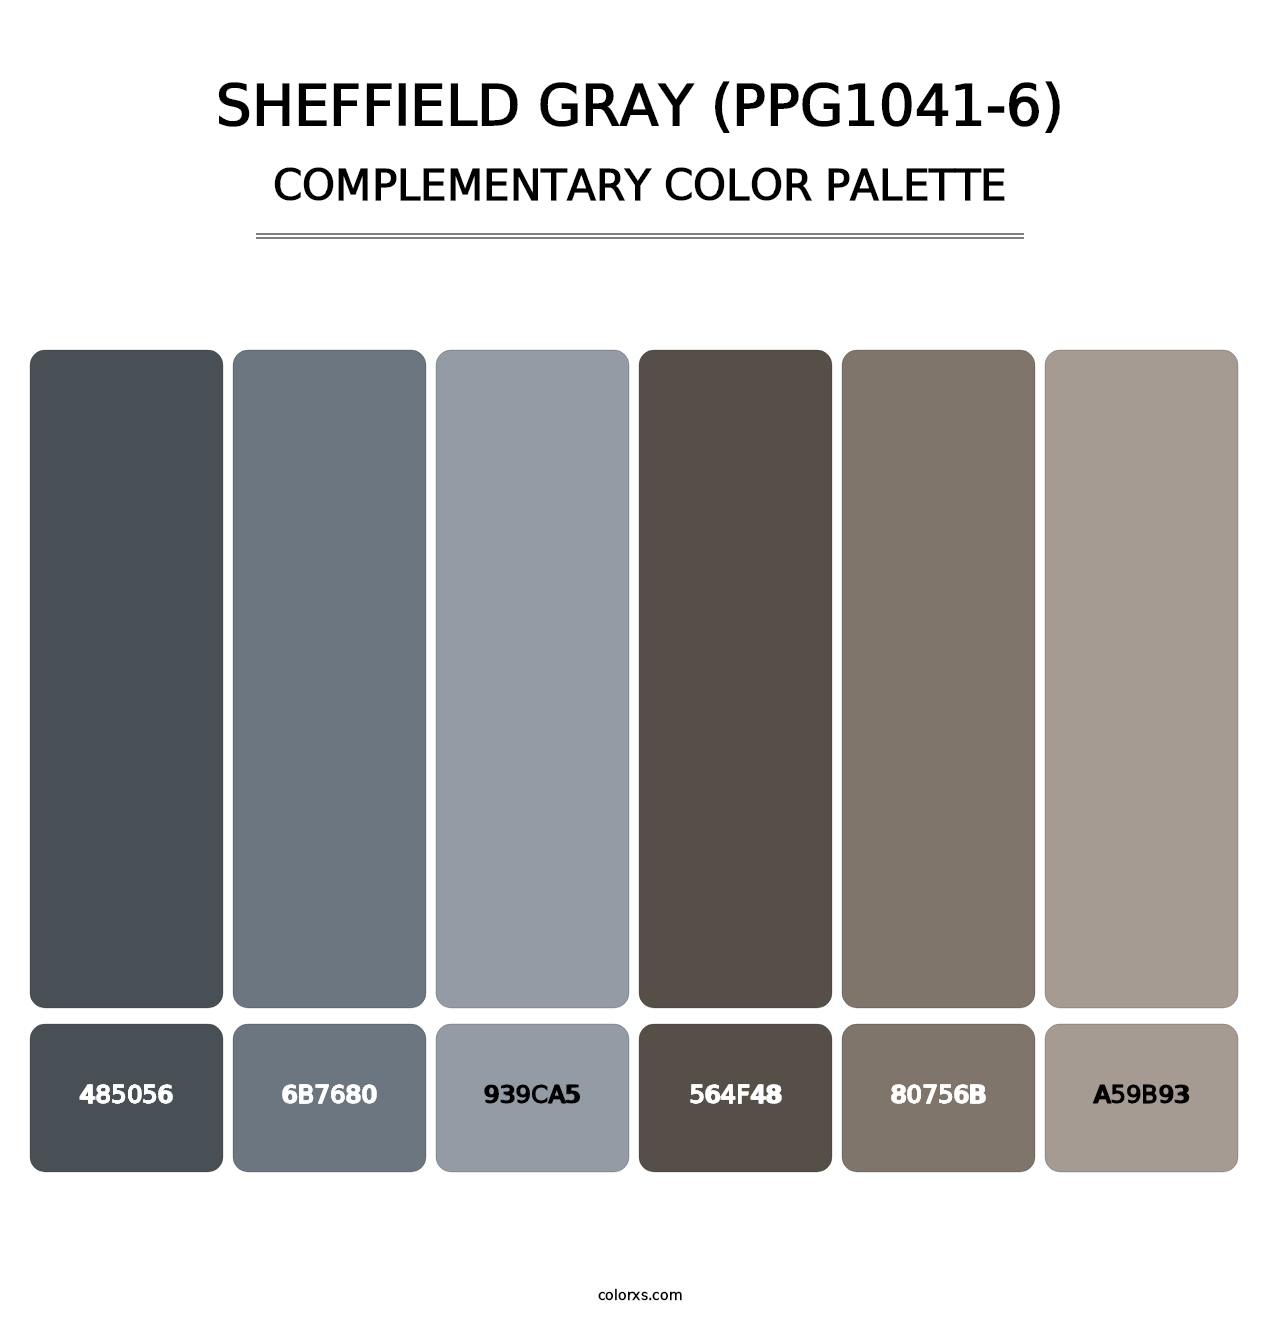 Sheffield Gray (PPG1041-6) - Complementary Color Palette